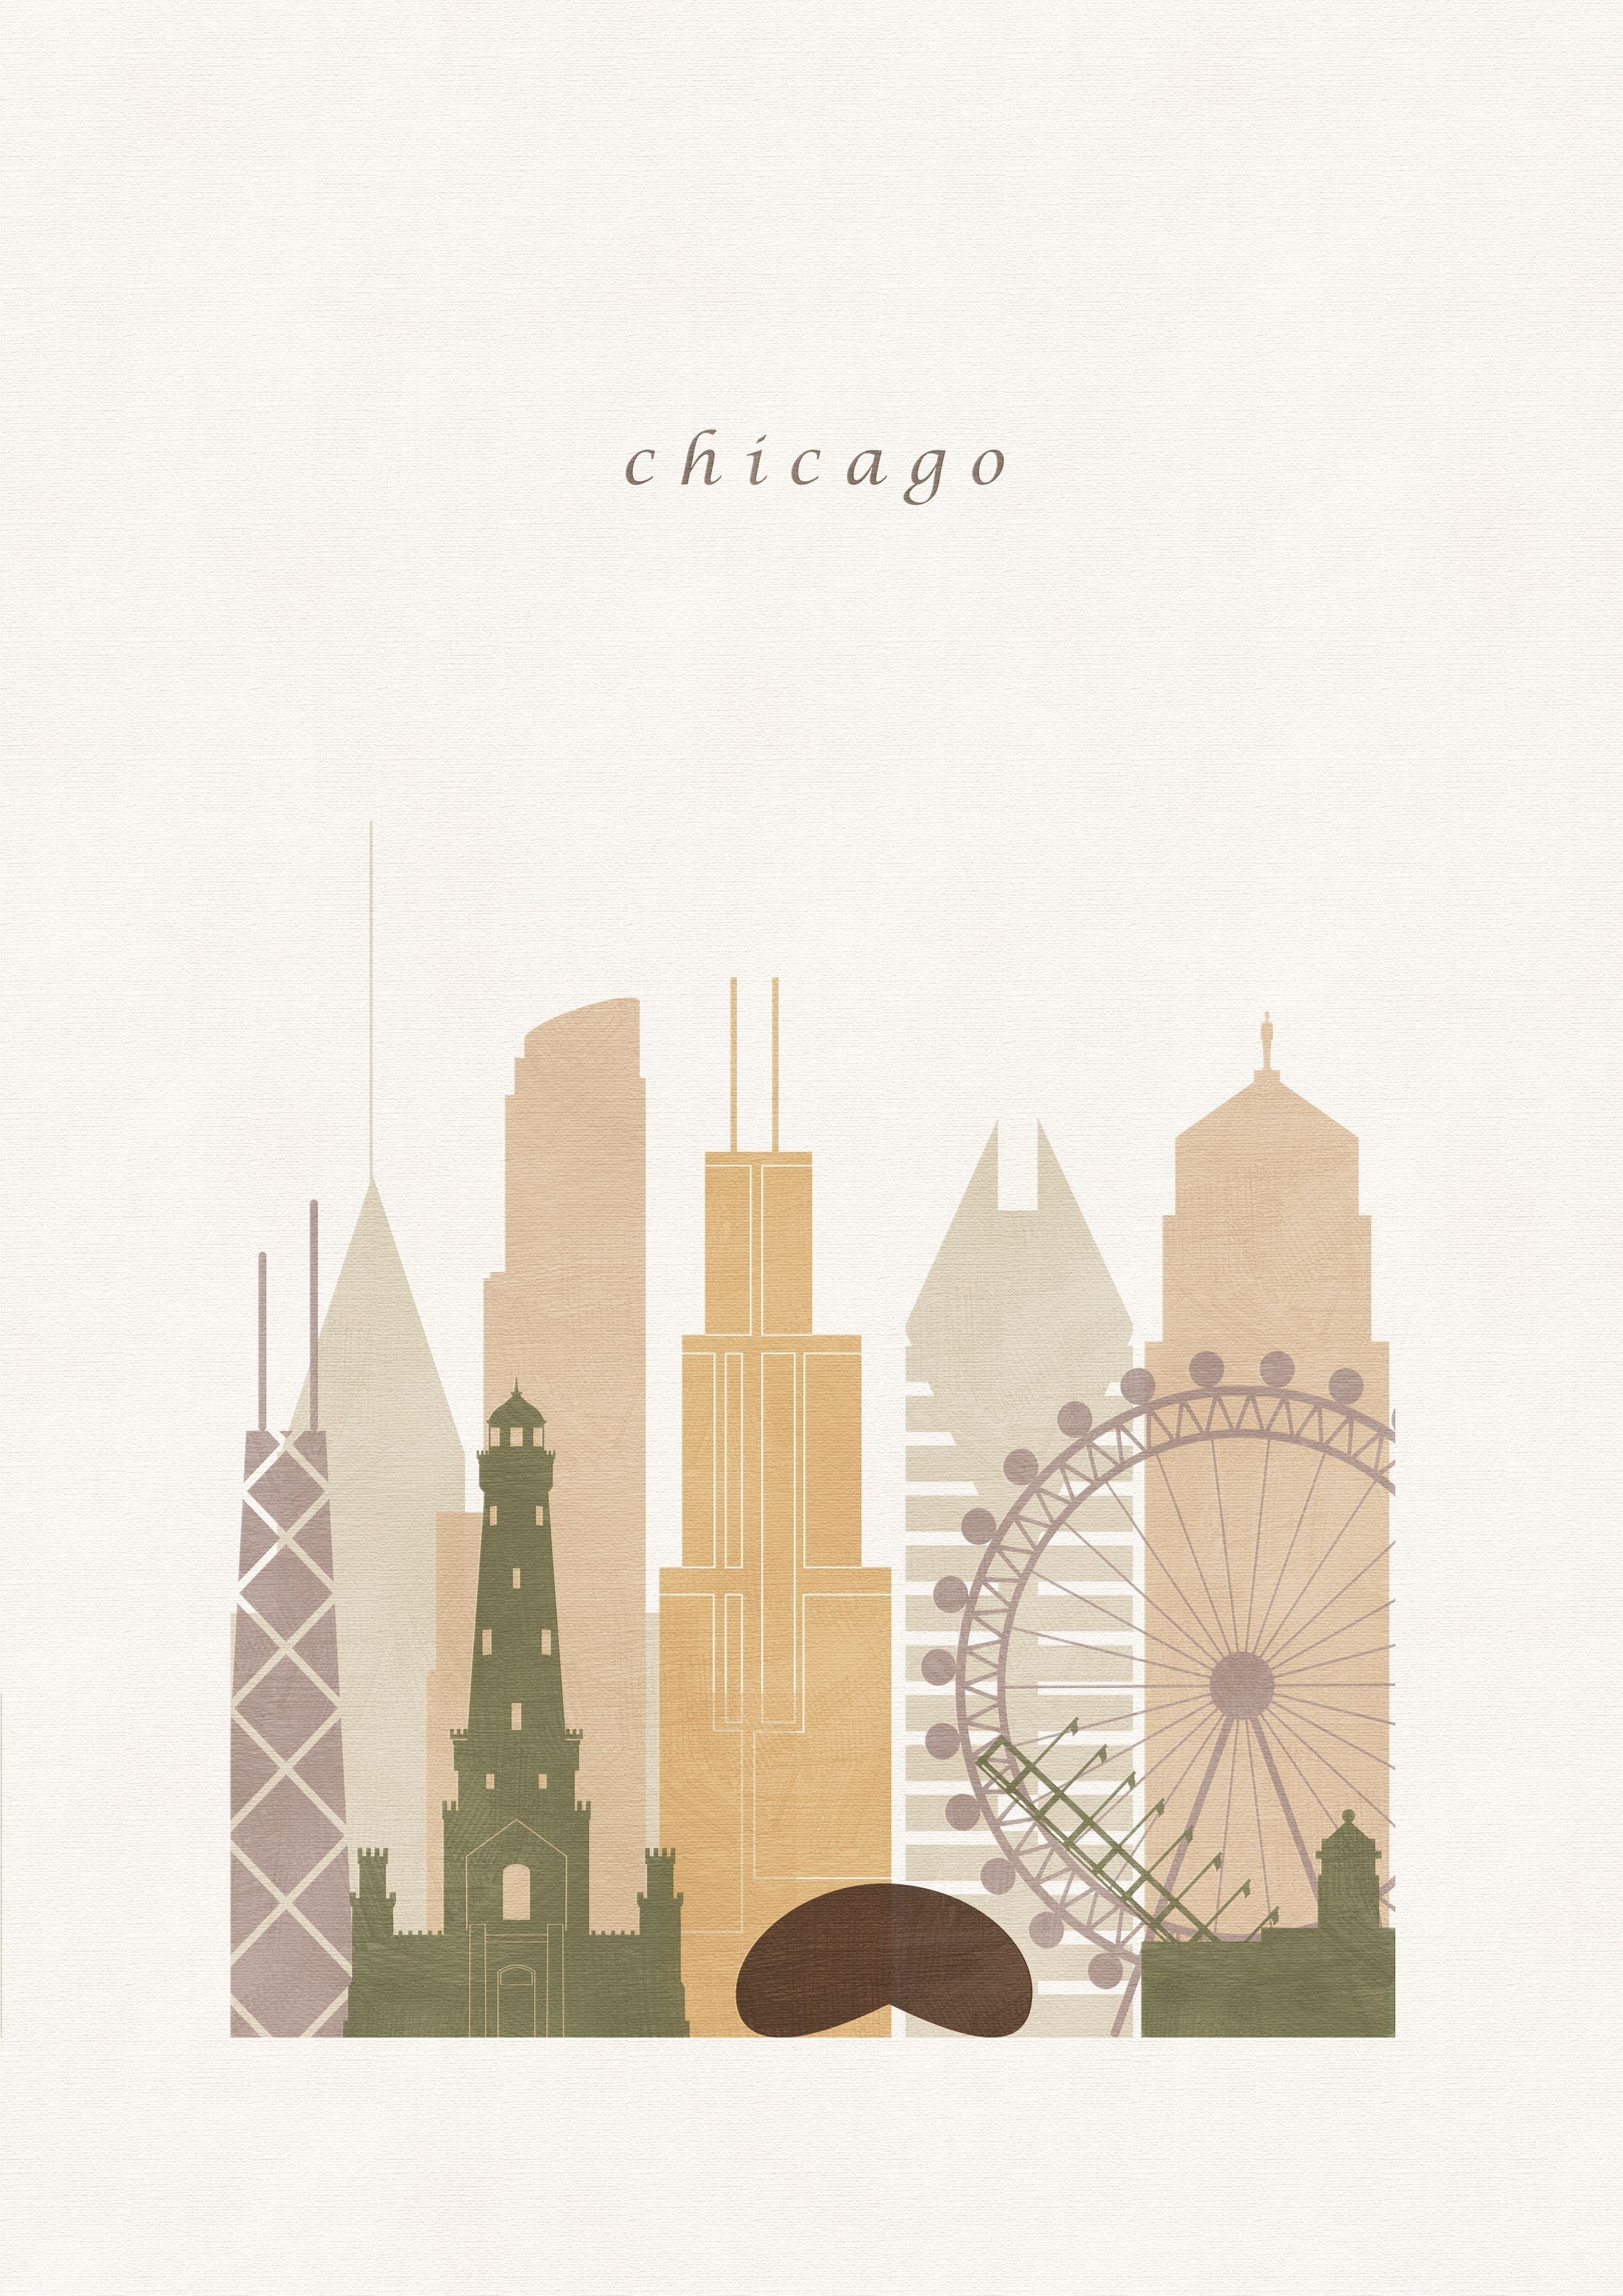 Chicago Prints Digital Download, Il, City Maps Chicago, City Wall Within Chicago Map Wall Art (View 11 of 20)